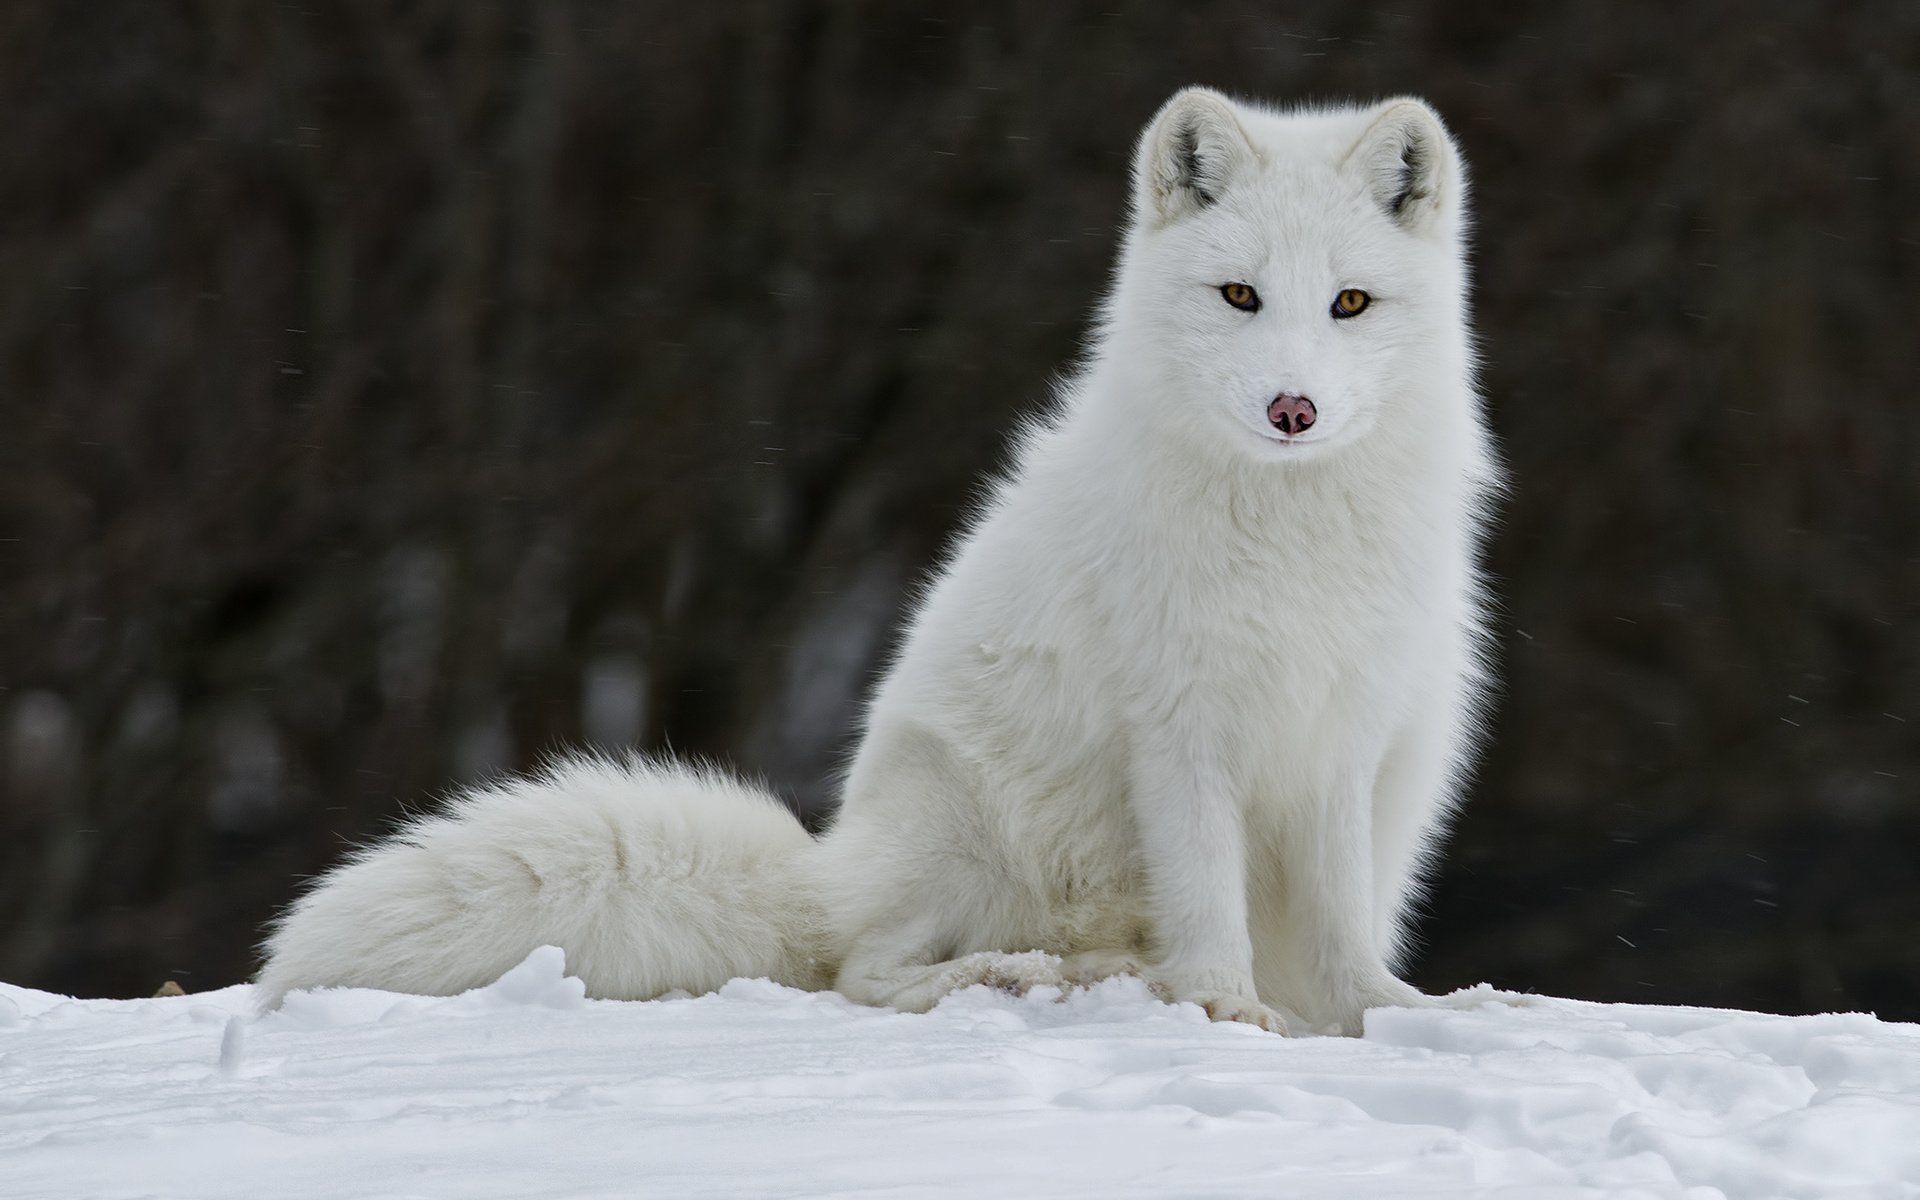 White Fox Wallpapers